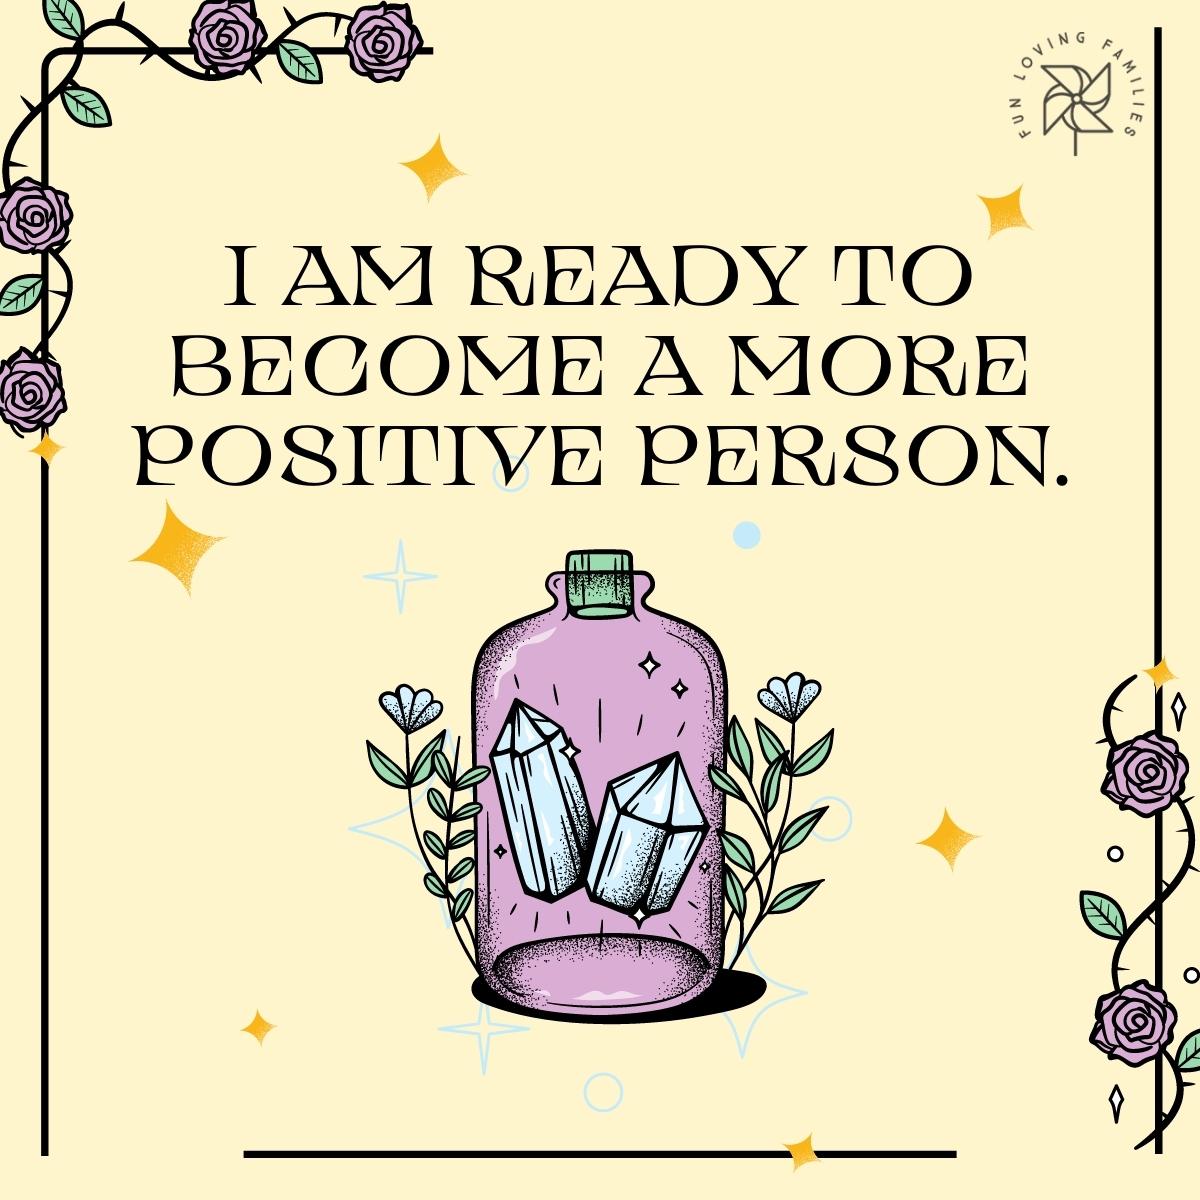 I am ready to become a more positive person affirmation